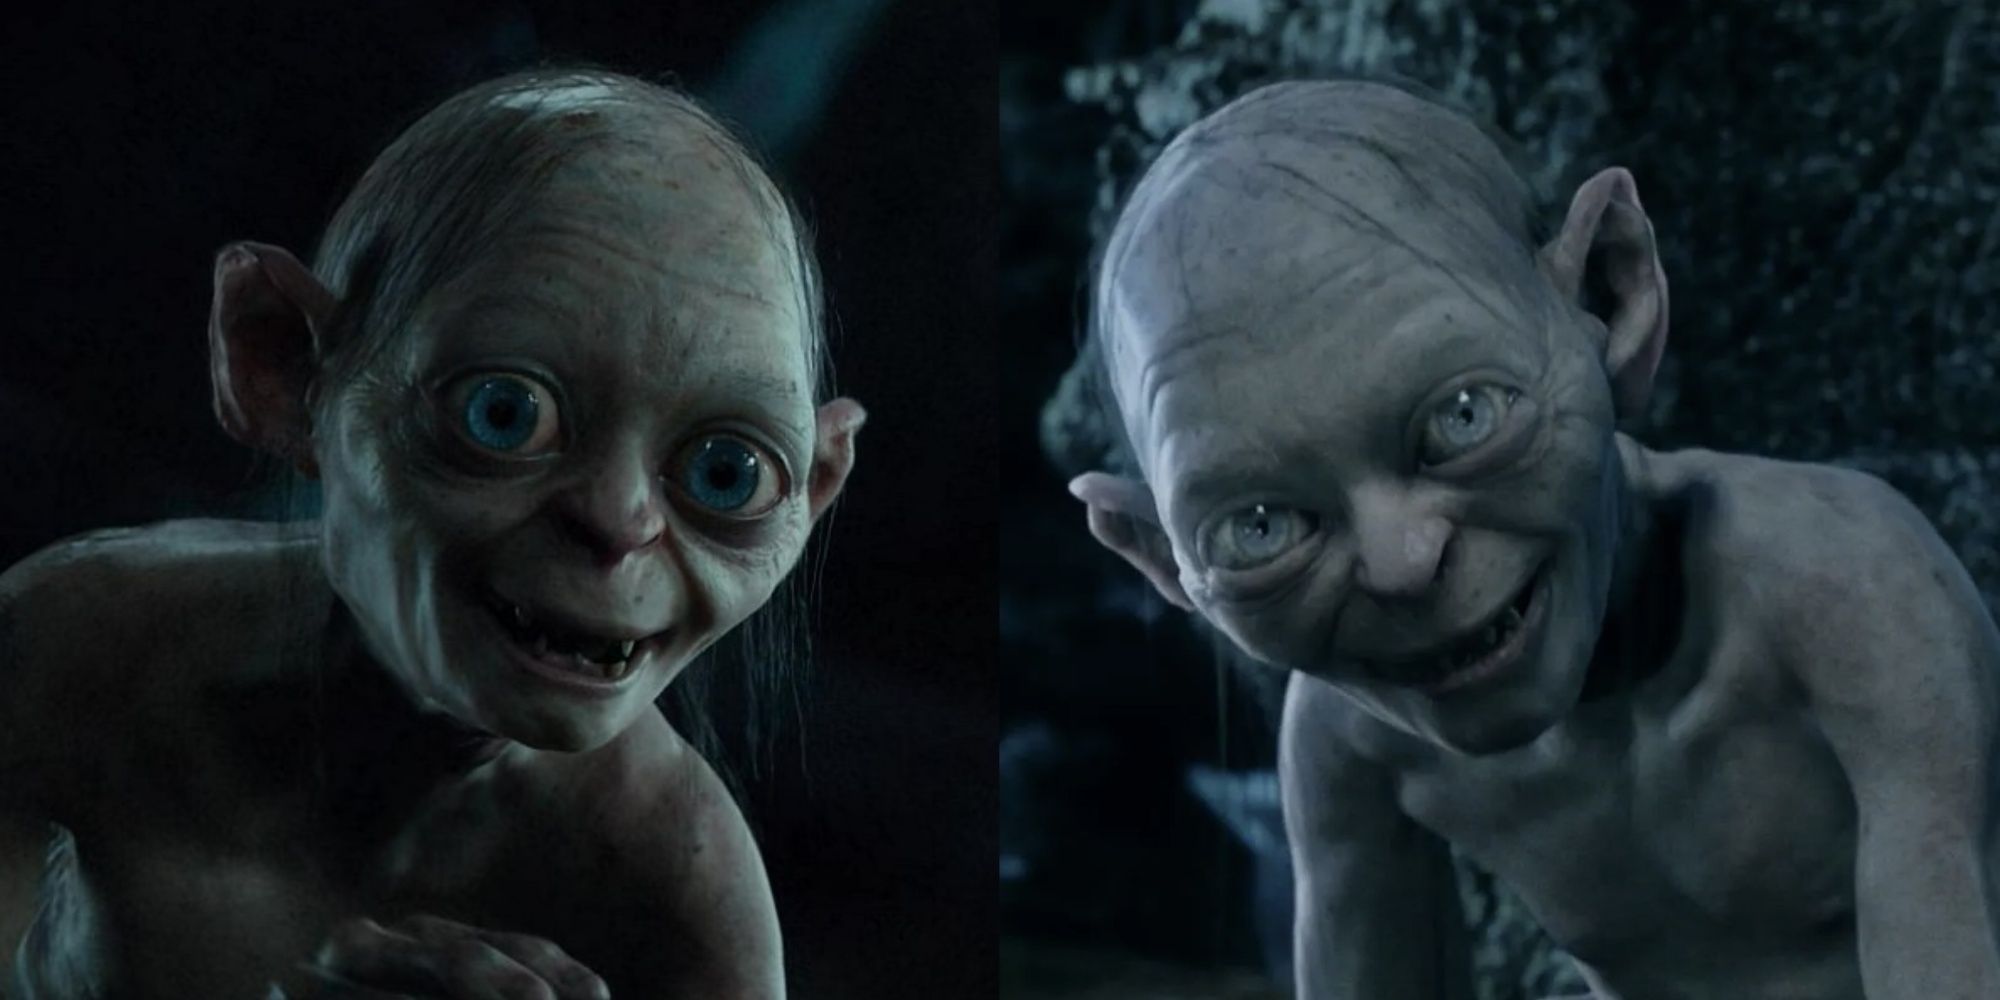 A feature split image of 2 Gollums from LOTR